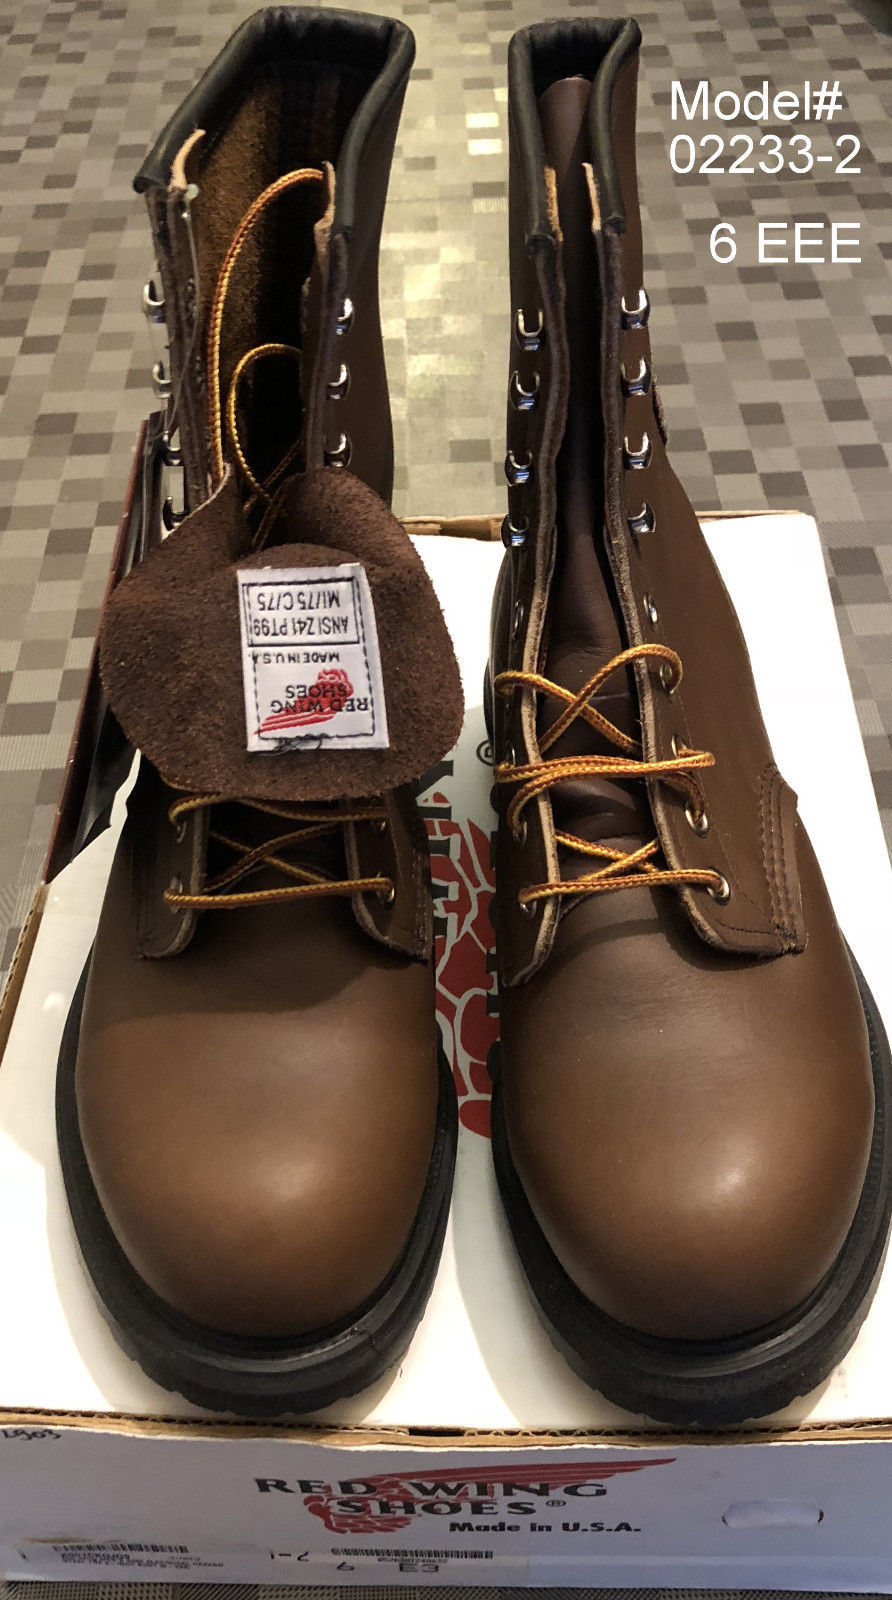 electrical hazard boots red wing